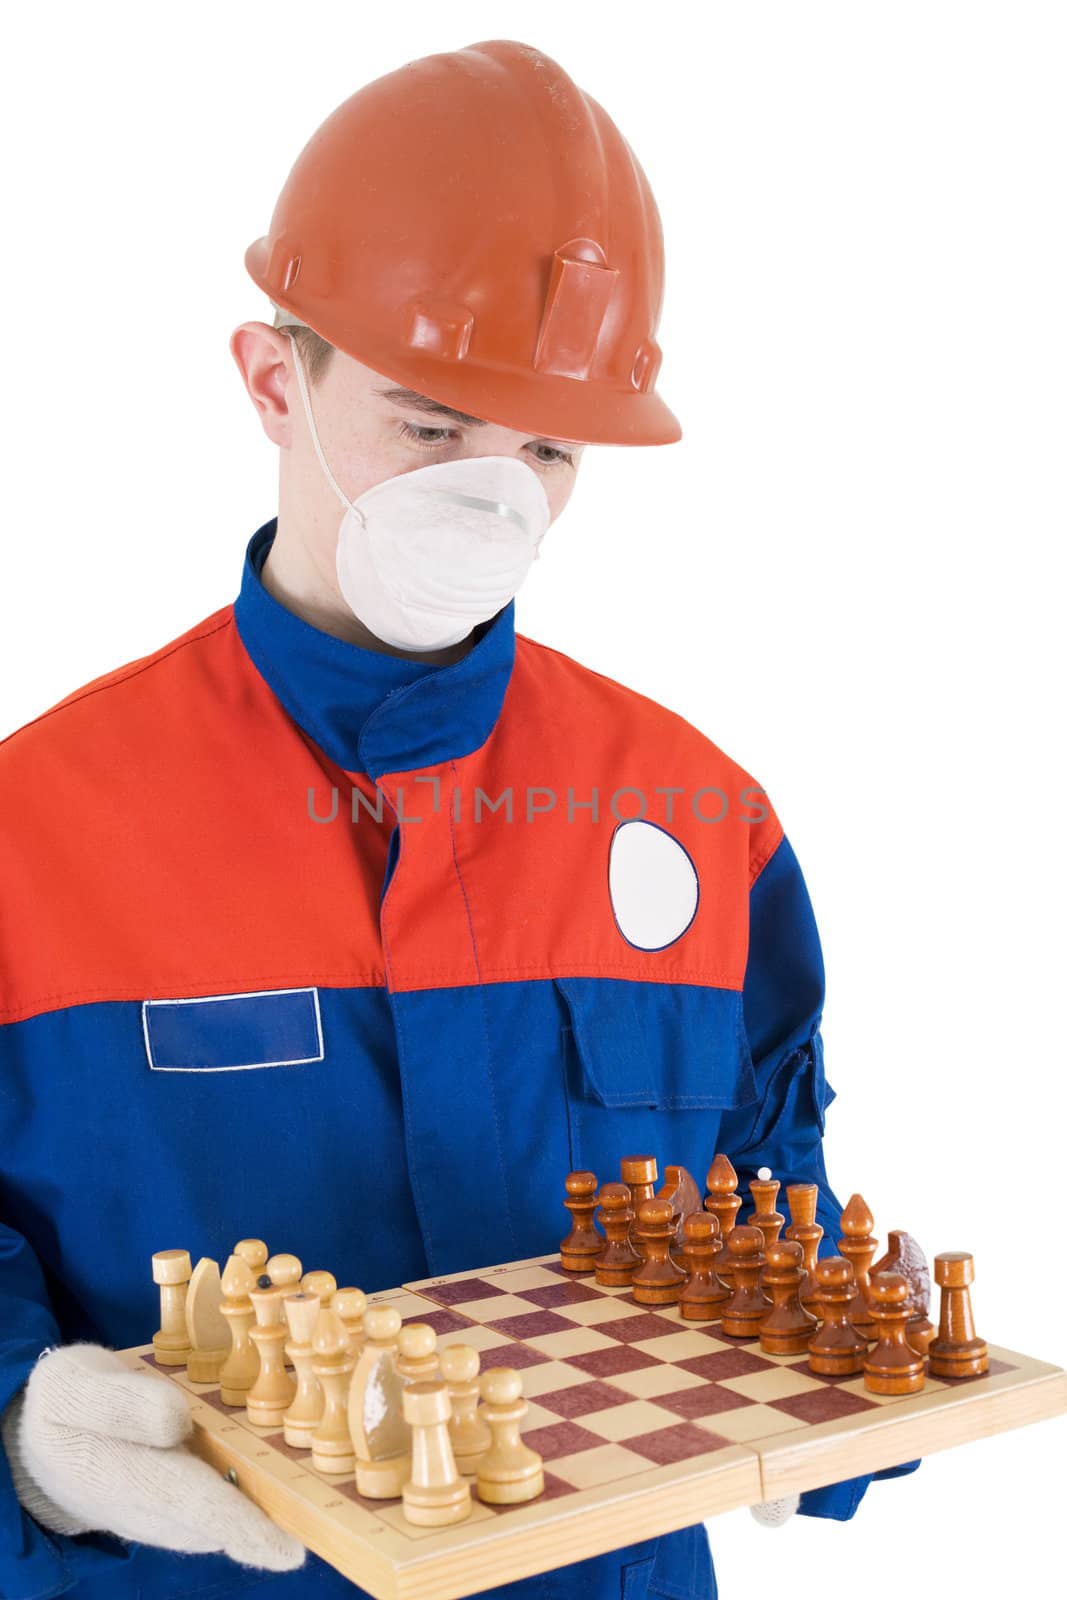 Labourer on the helmet and respertor with chess